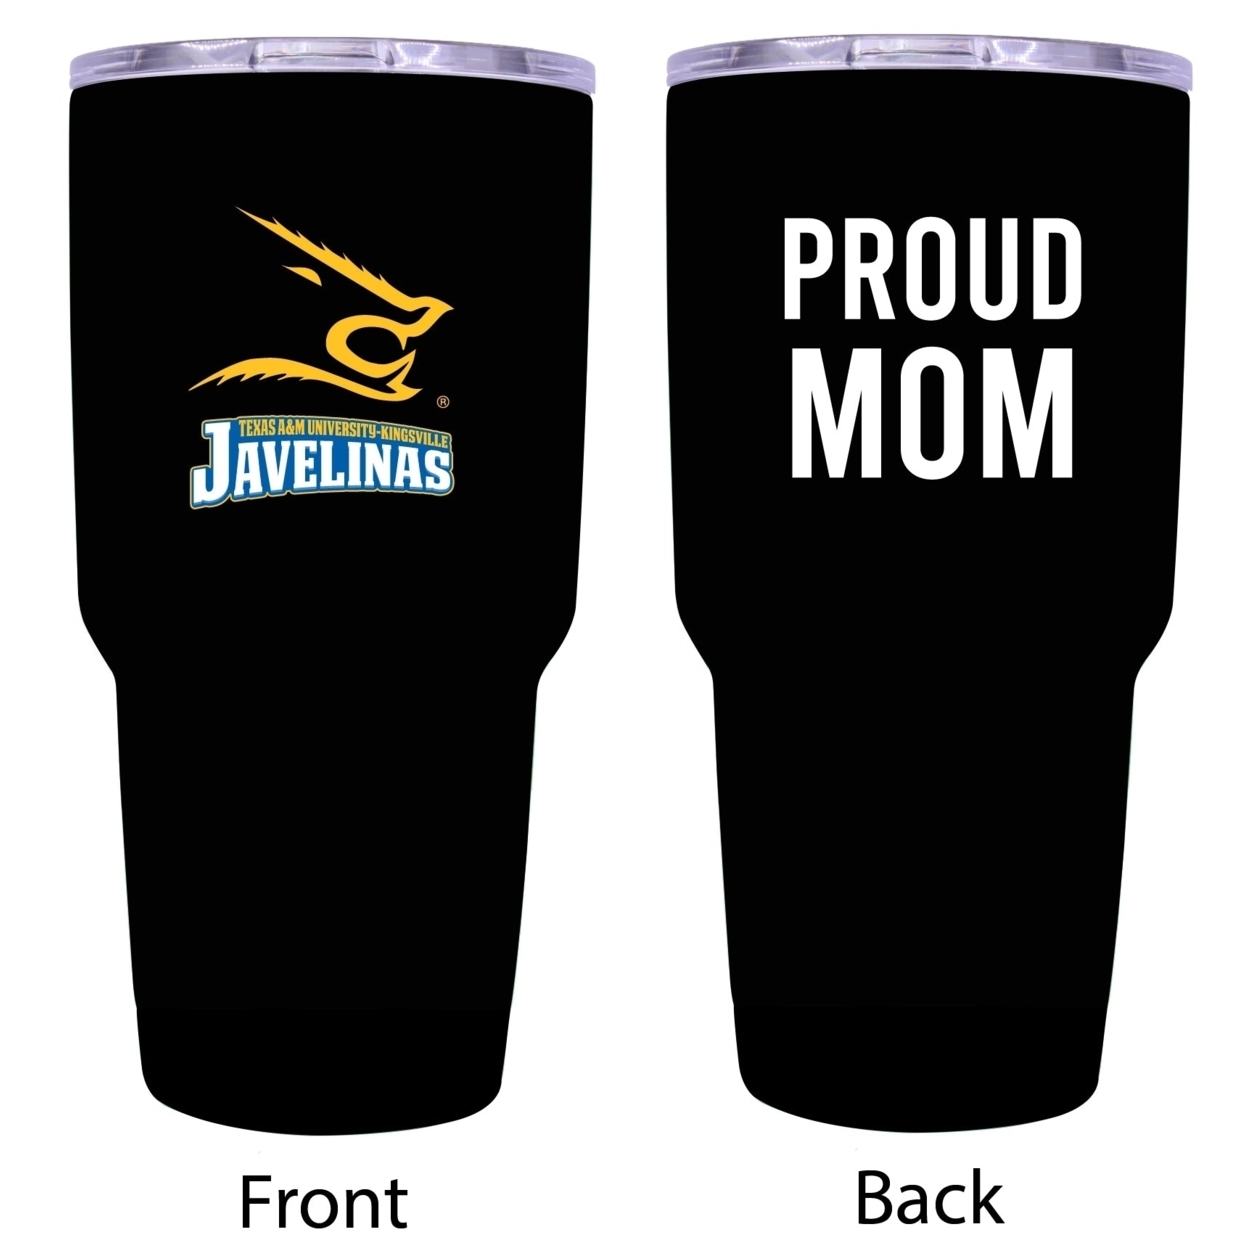 R And R Imports Texas A&M Kingsville Javelinas Proud Mom 24 Oz Insulated Stainless Steel Tumblers Black.